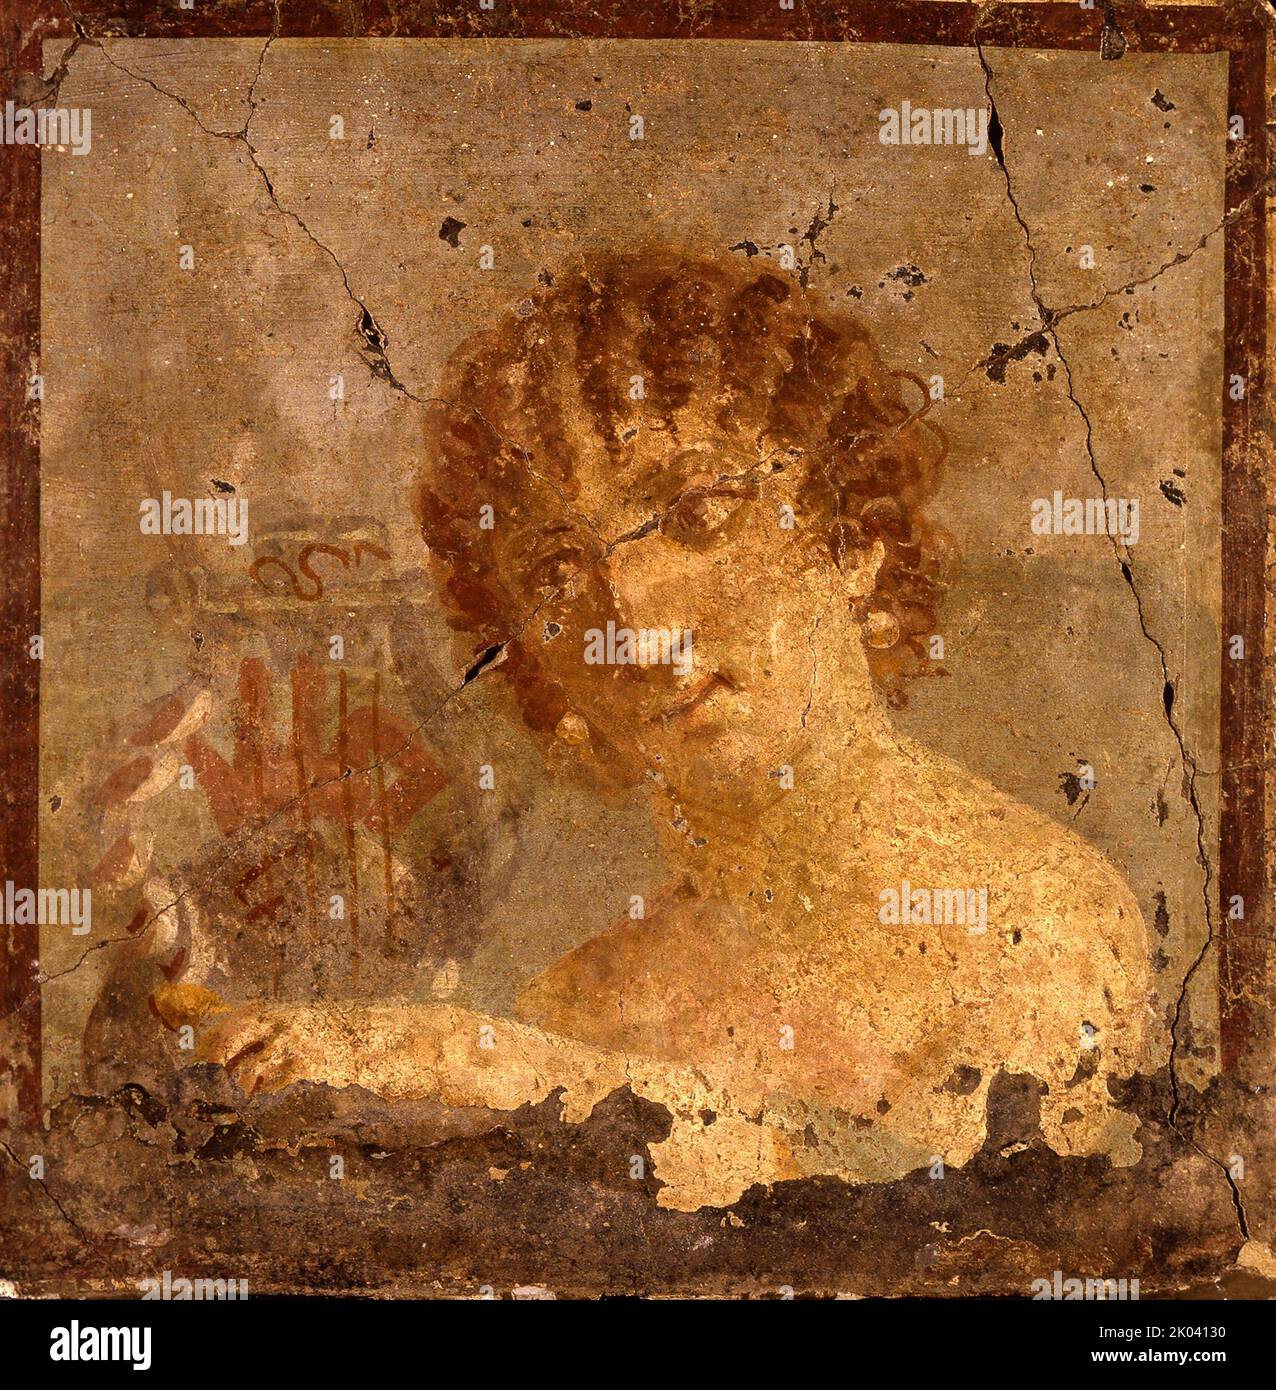 Young woman plucking the strings of a lyre, 1st century. Found in the collection of the Museo Civico d'Arte Antica, Turin. Stock Photo